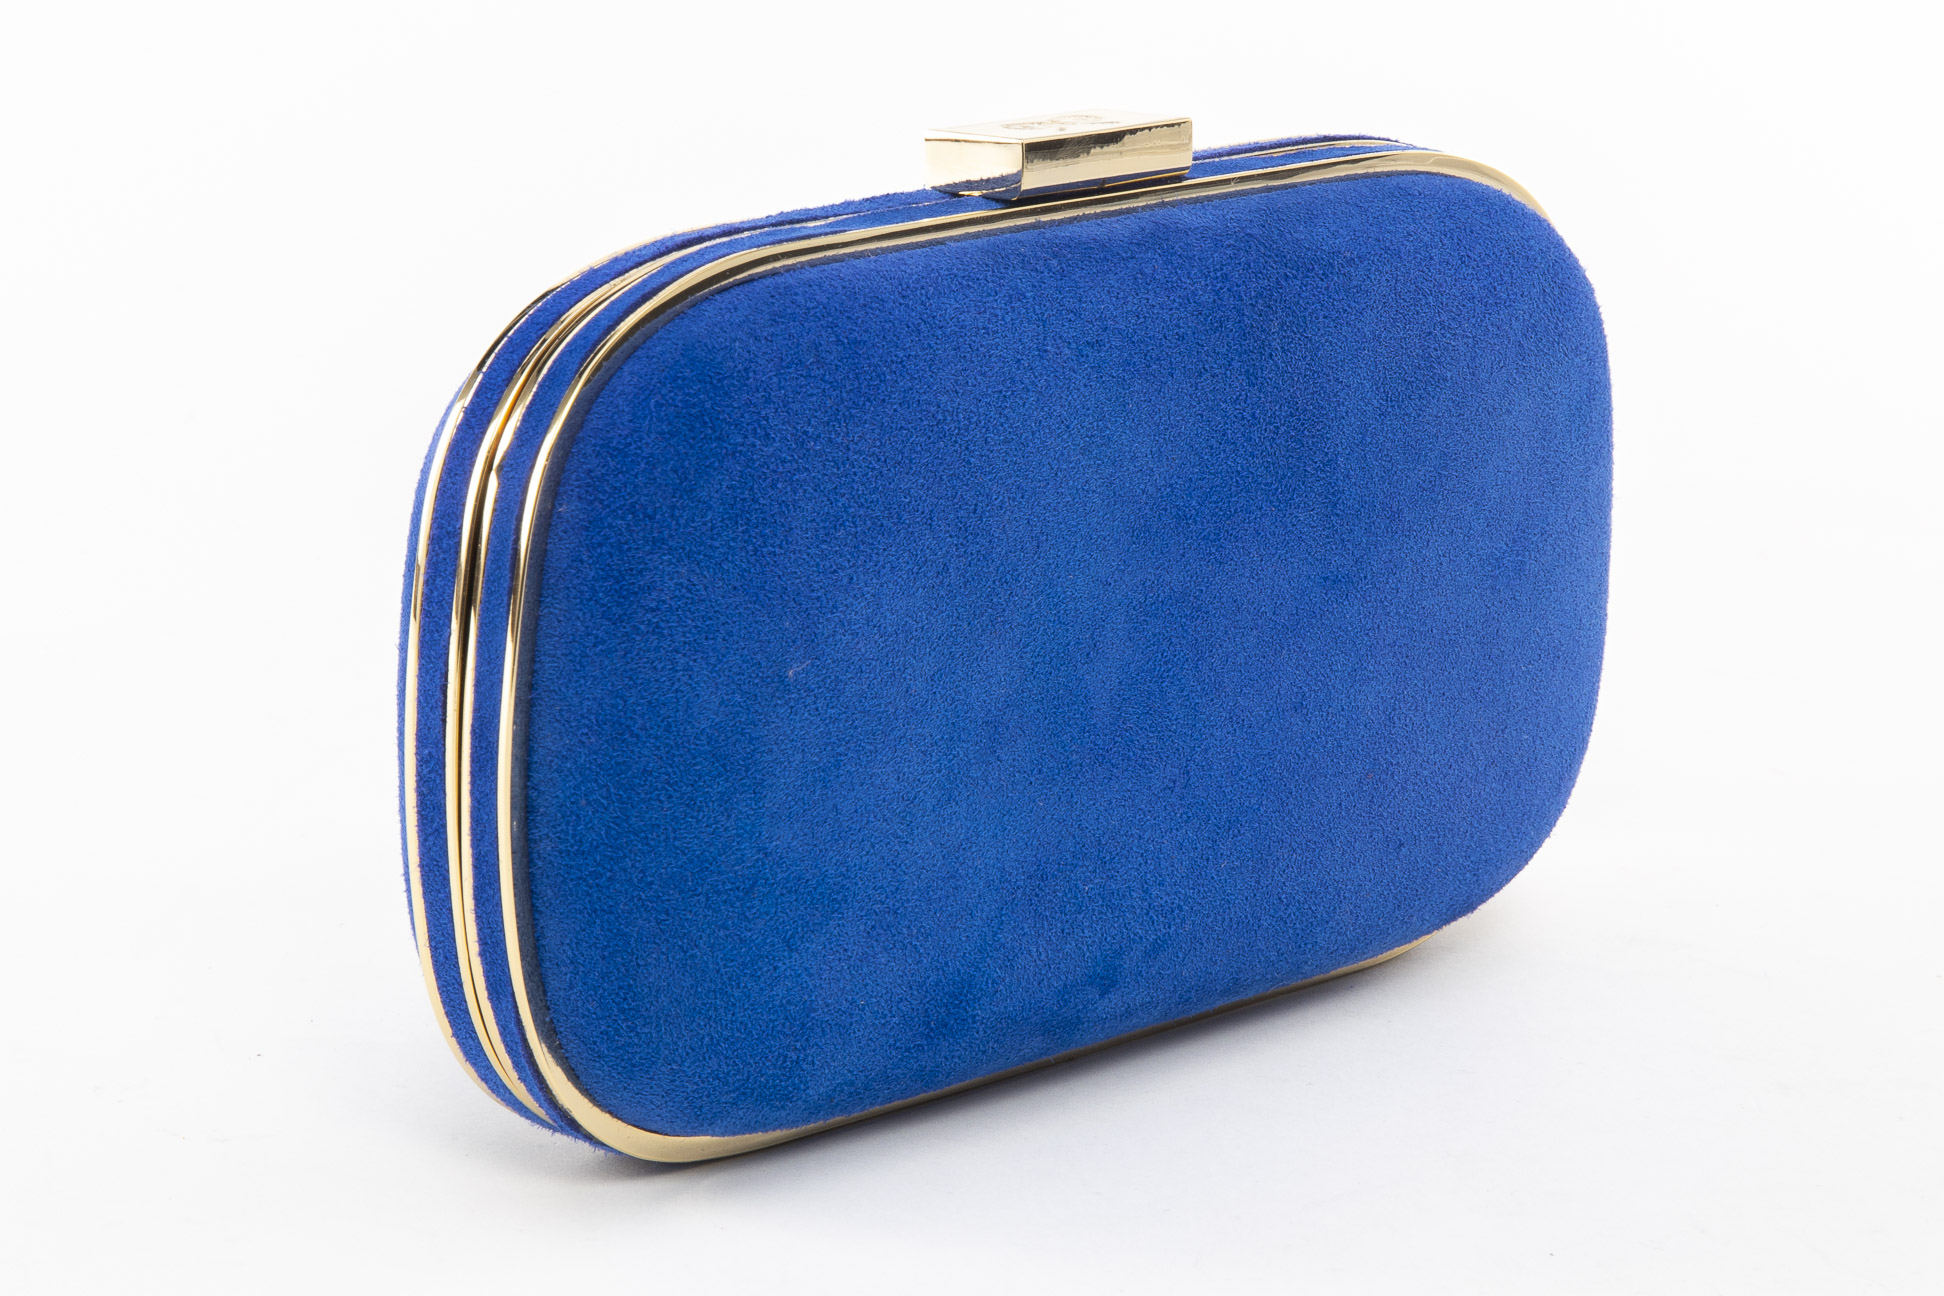 AN ANYA HINDMARCH 'MARANO' BLUE SUEDE CLUTCH - Image 2 of 3